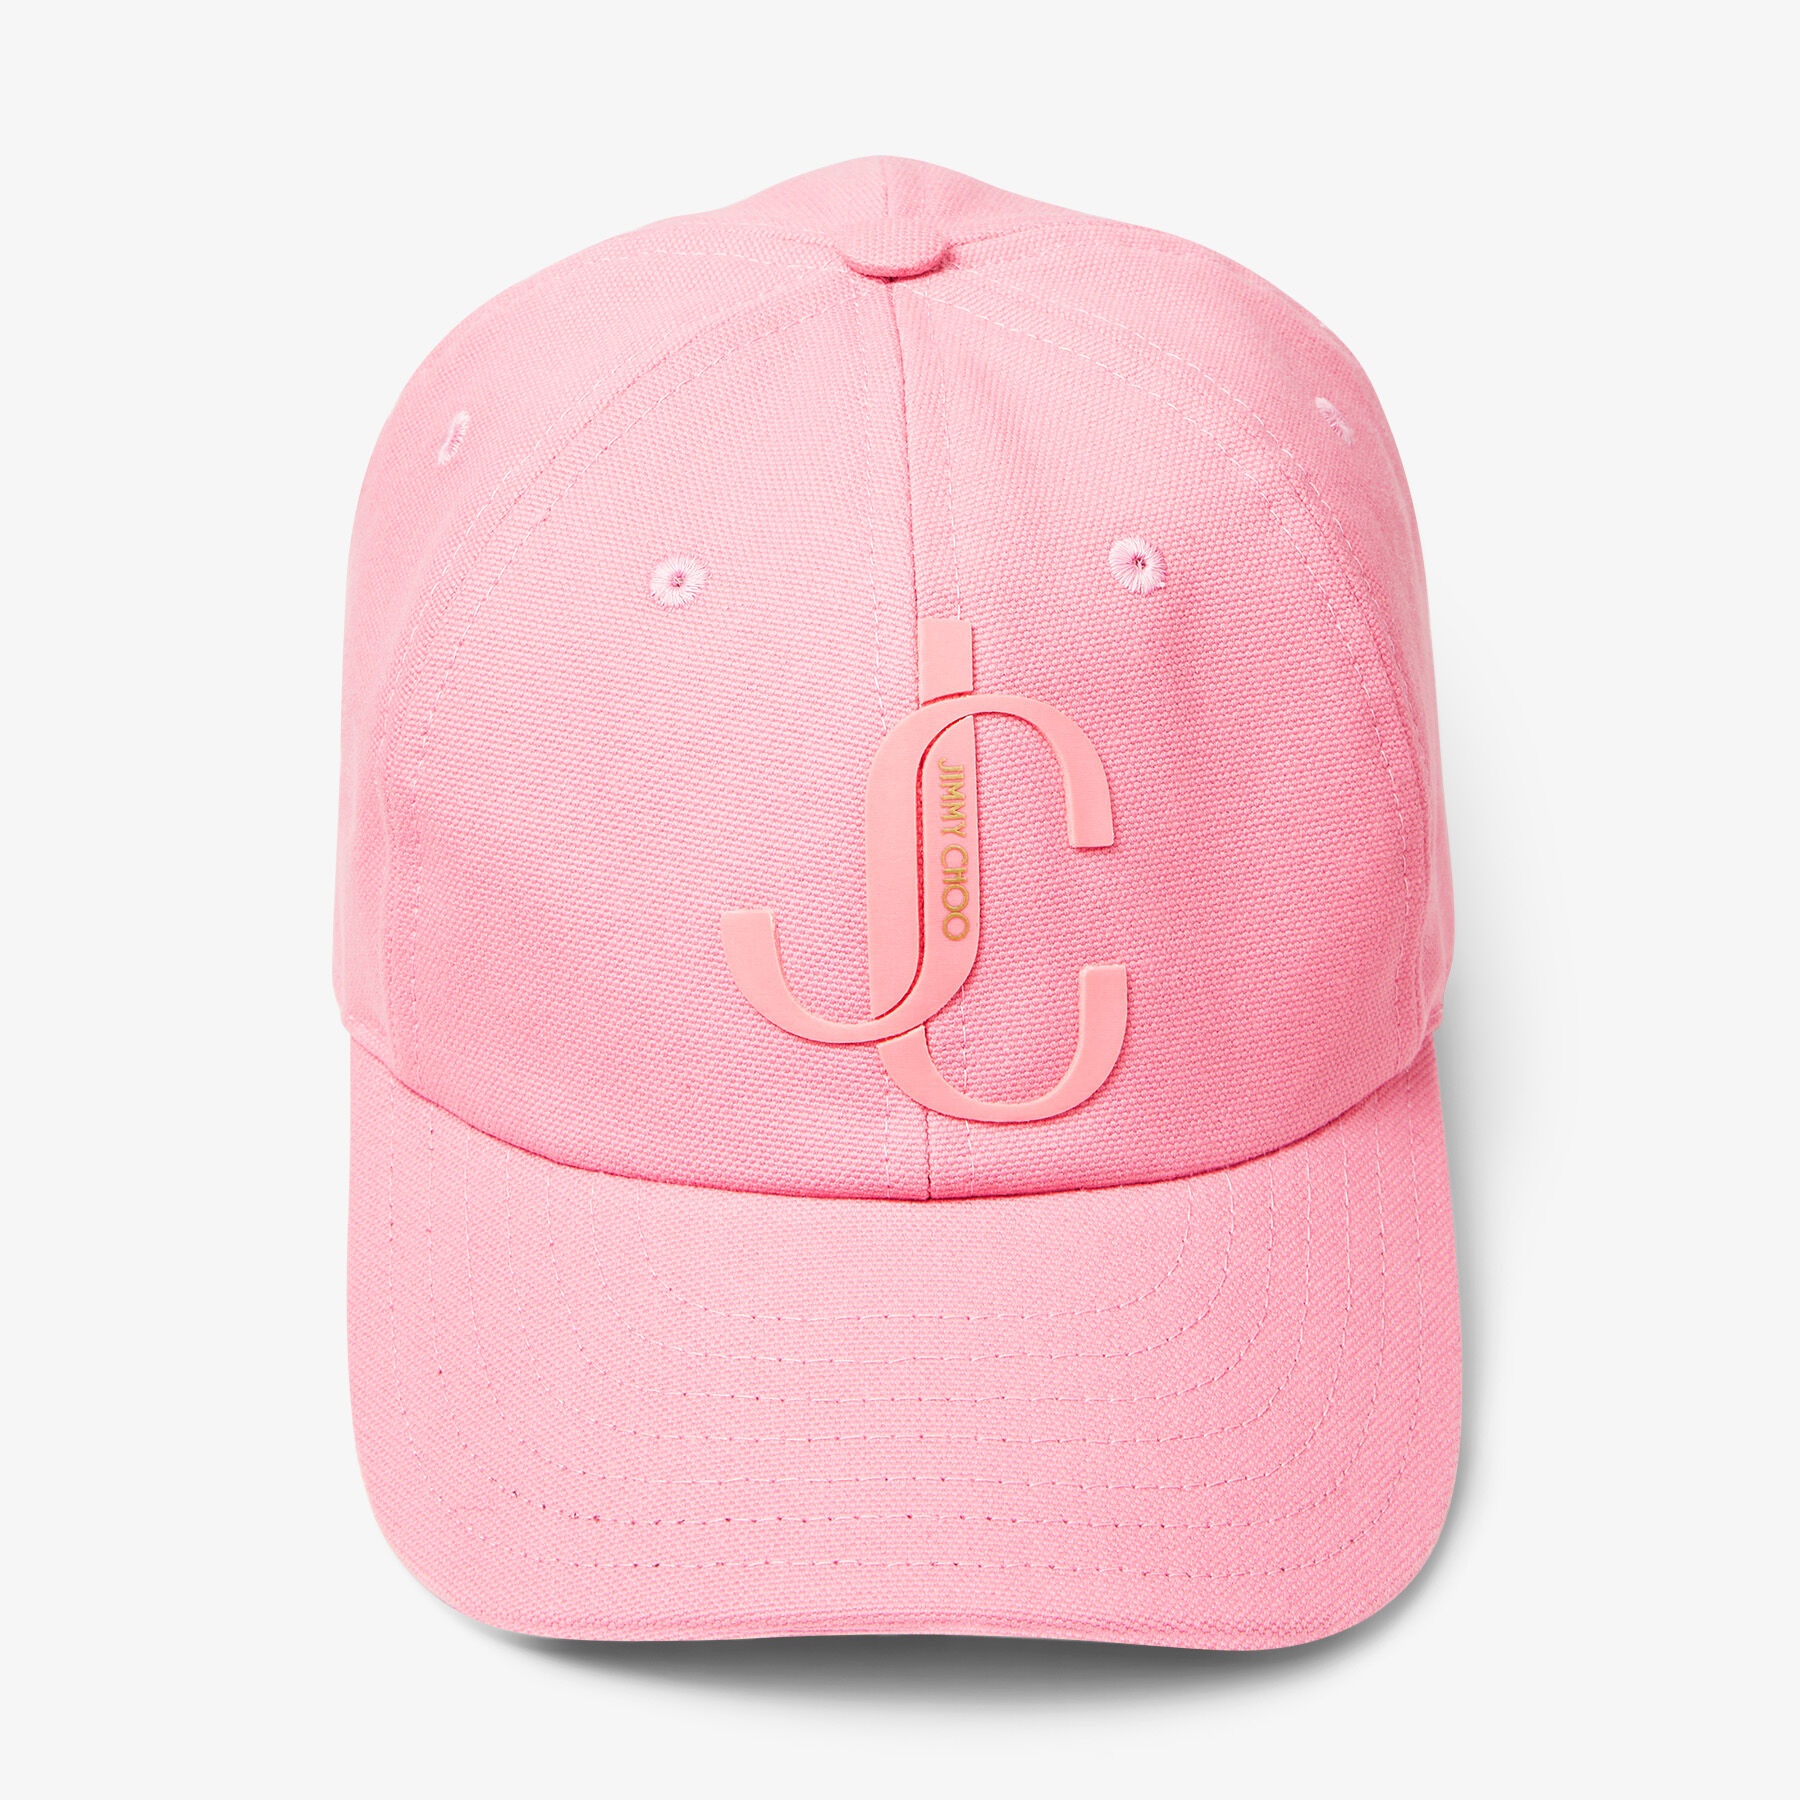 Paxy
Candy Pink Cotton Baseball Cap with Shiny JC Monogram - 1